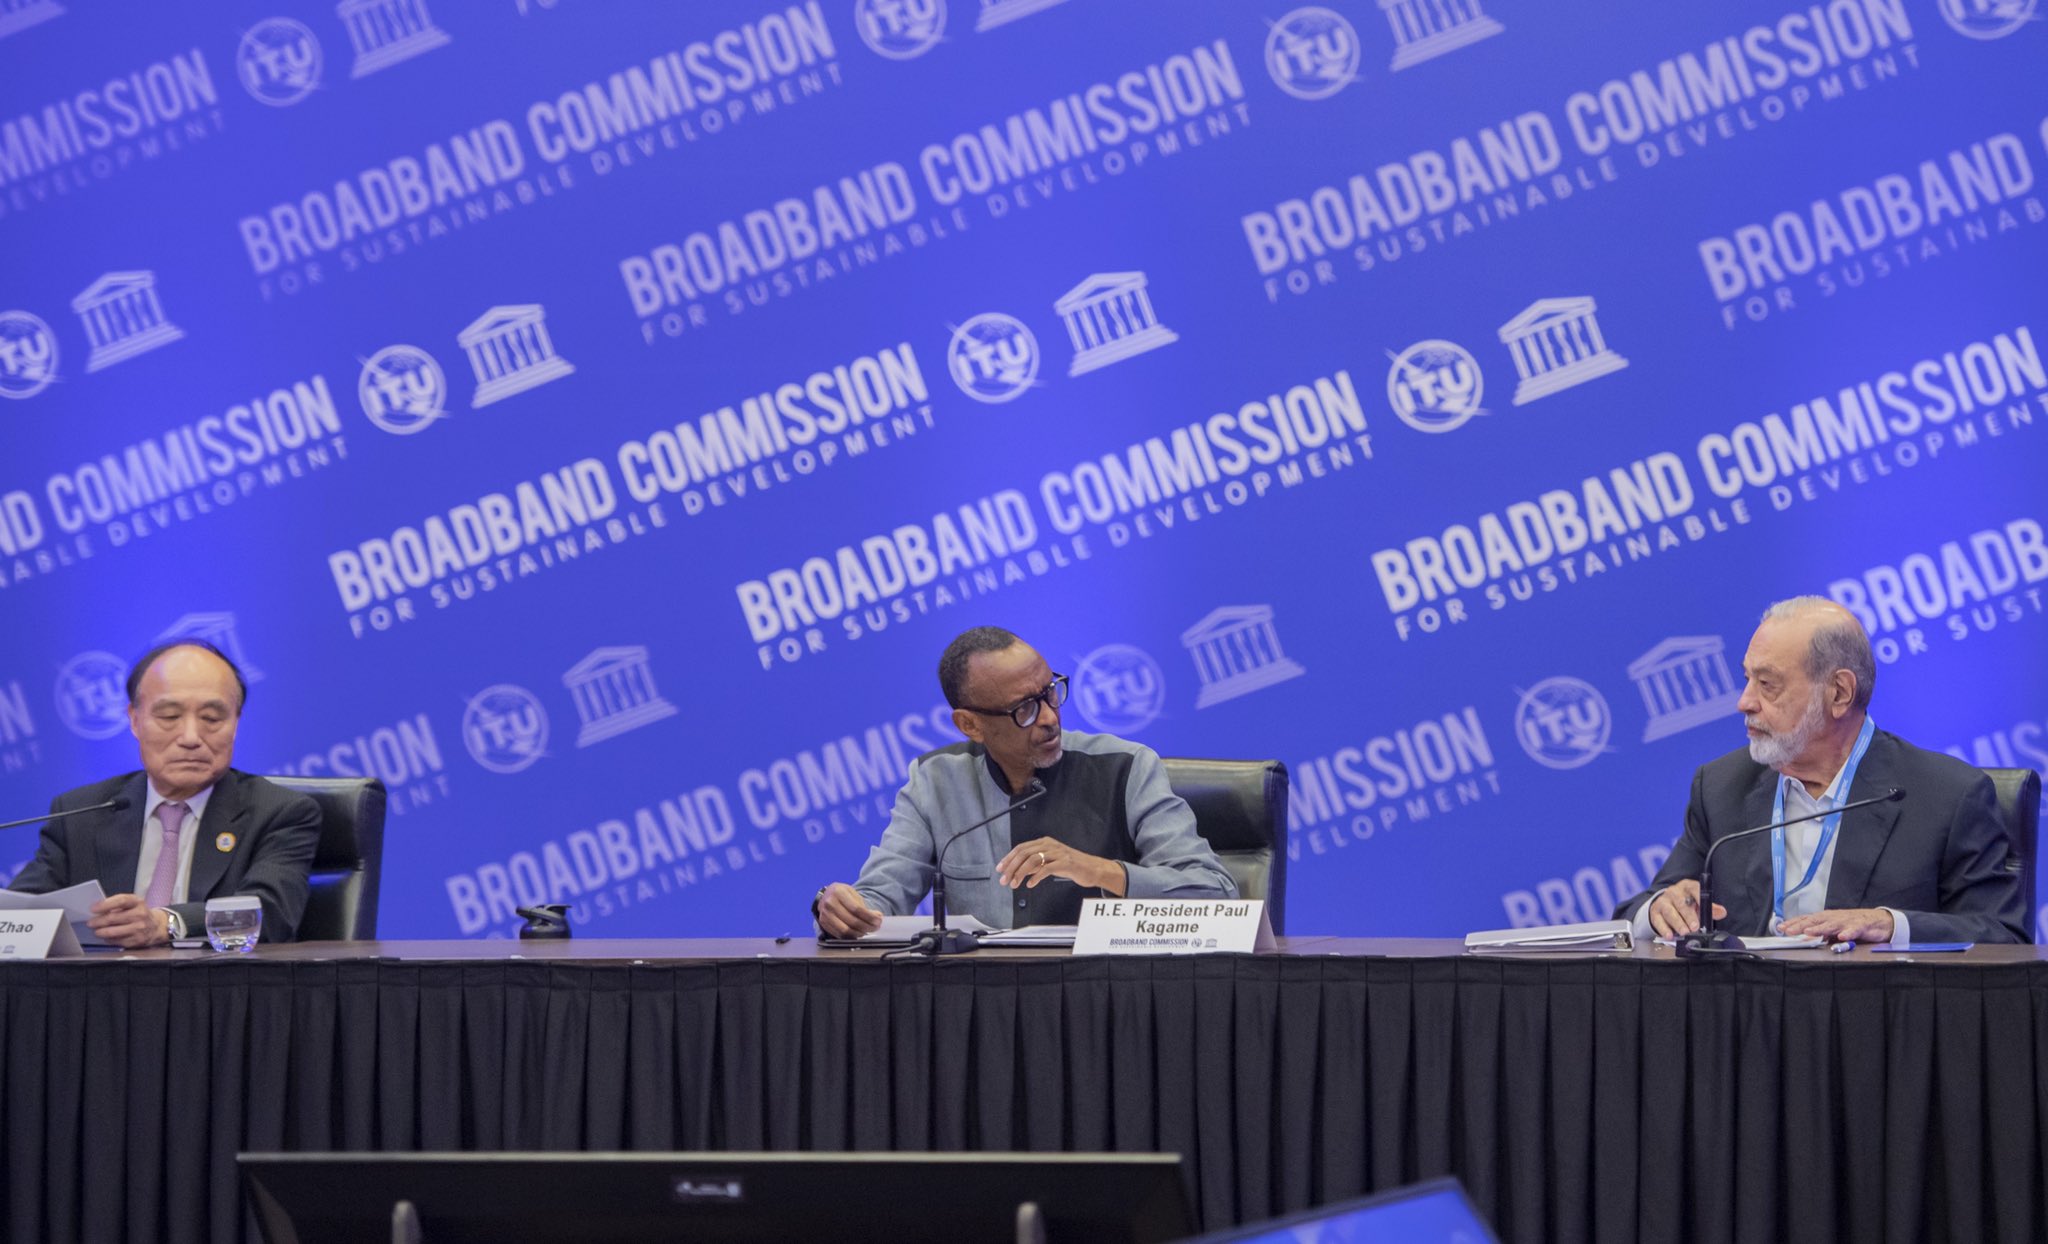 President Paul Kagame and  Carlos Slim, a Mexican billionaire(Right) and  Houlin Zhao, the Secretary General of International Telecommunication Union(left) during  the Broadband Commission Meeting for Sustainable Development in Kigali on June 5, 2022. Photo by Village Urugwiro